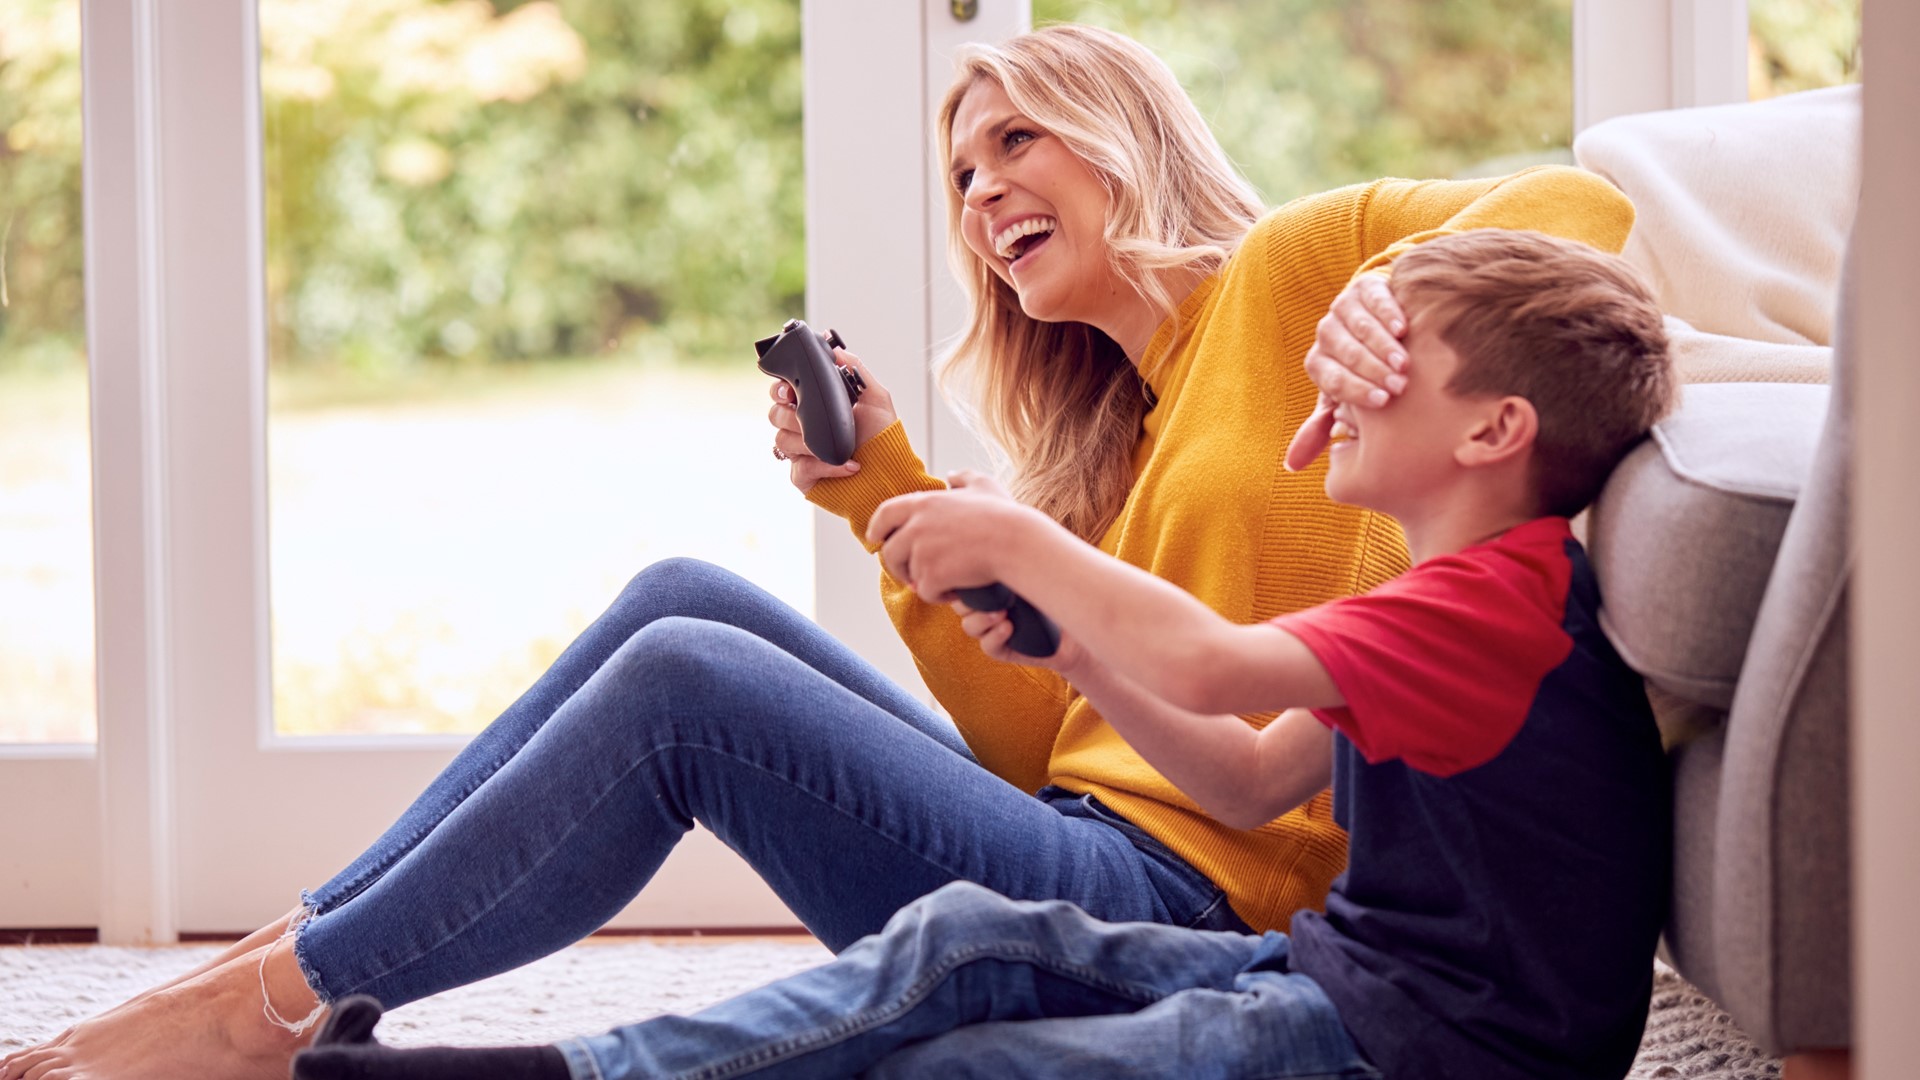 A mom and her son laugh while playing video games together.